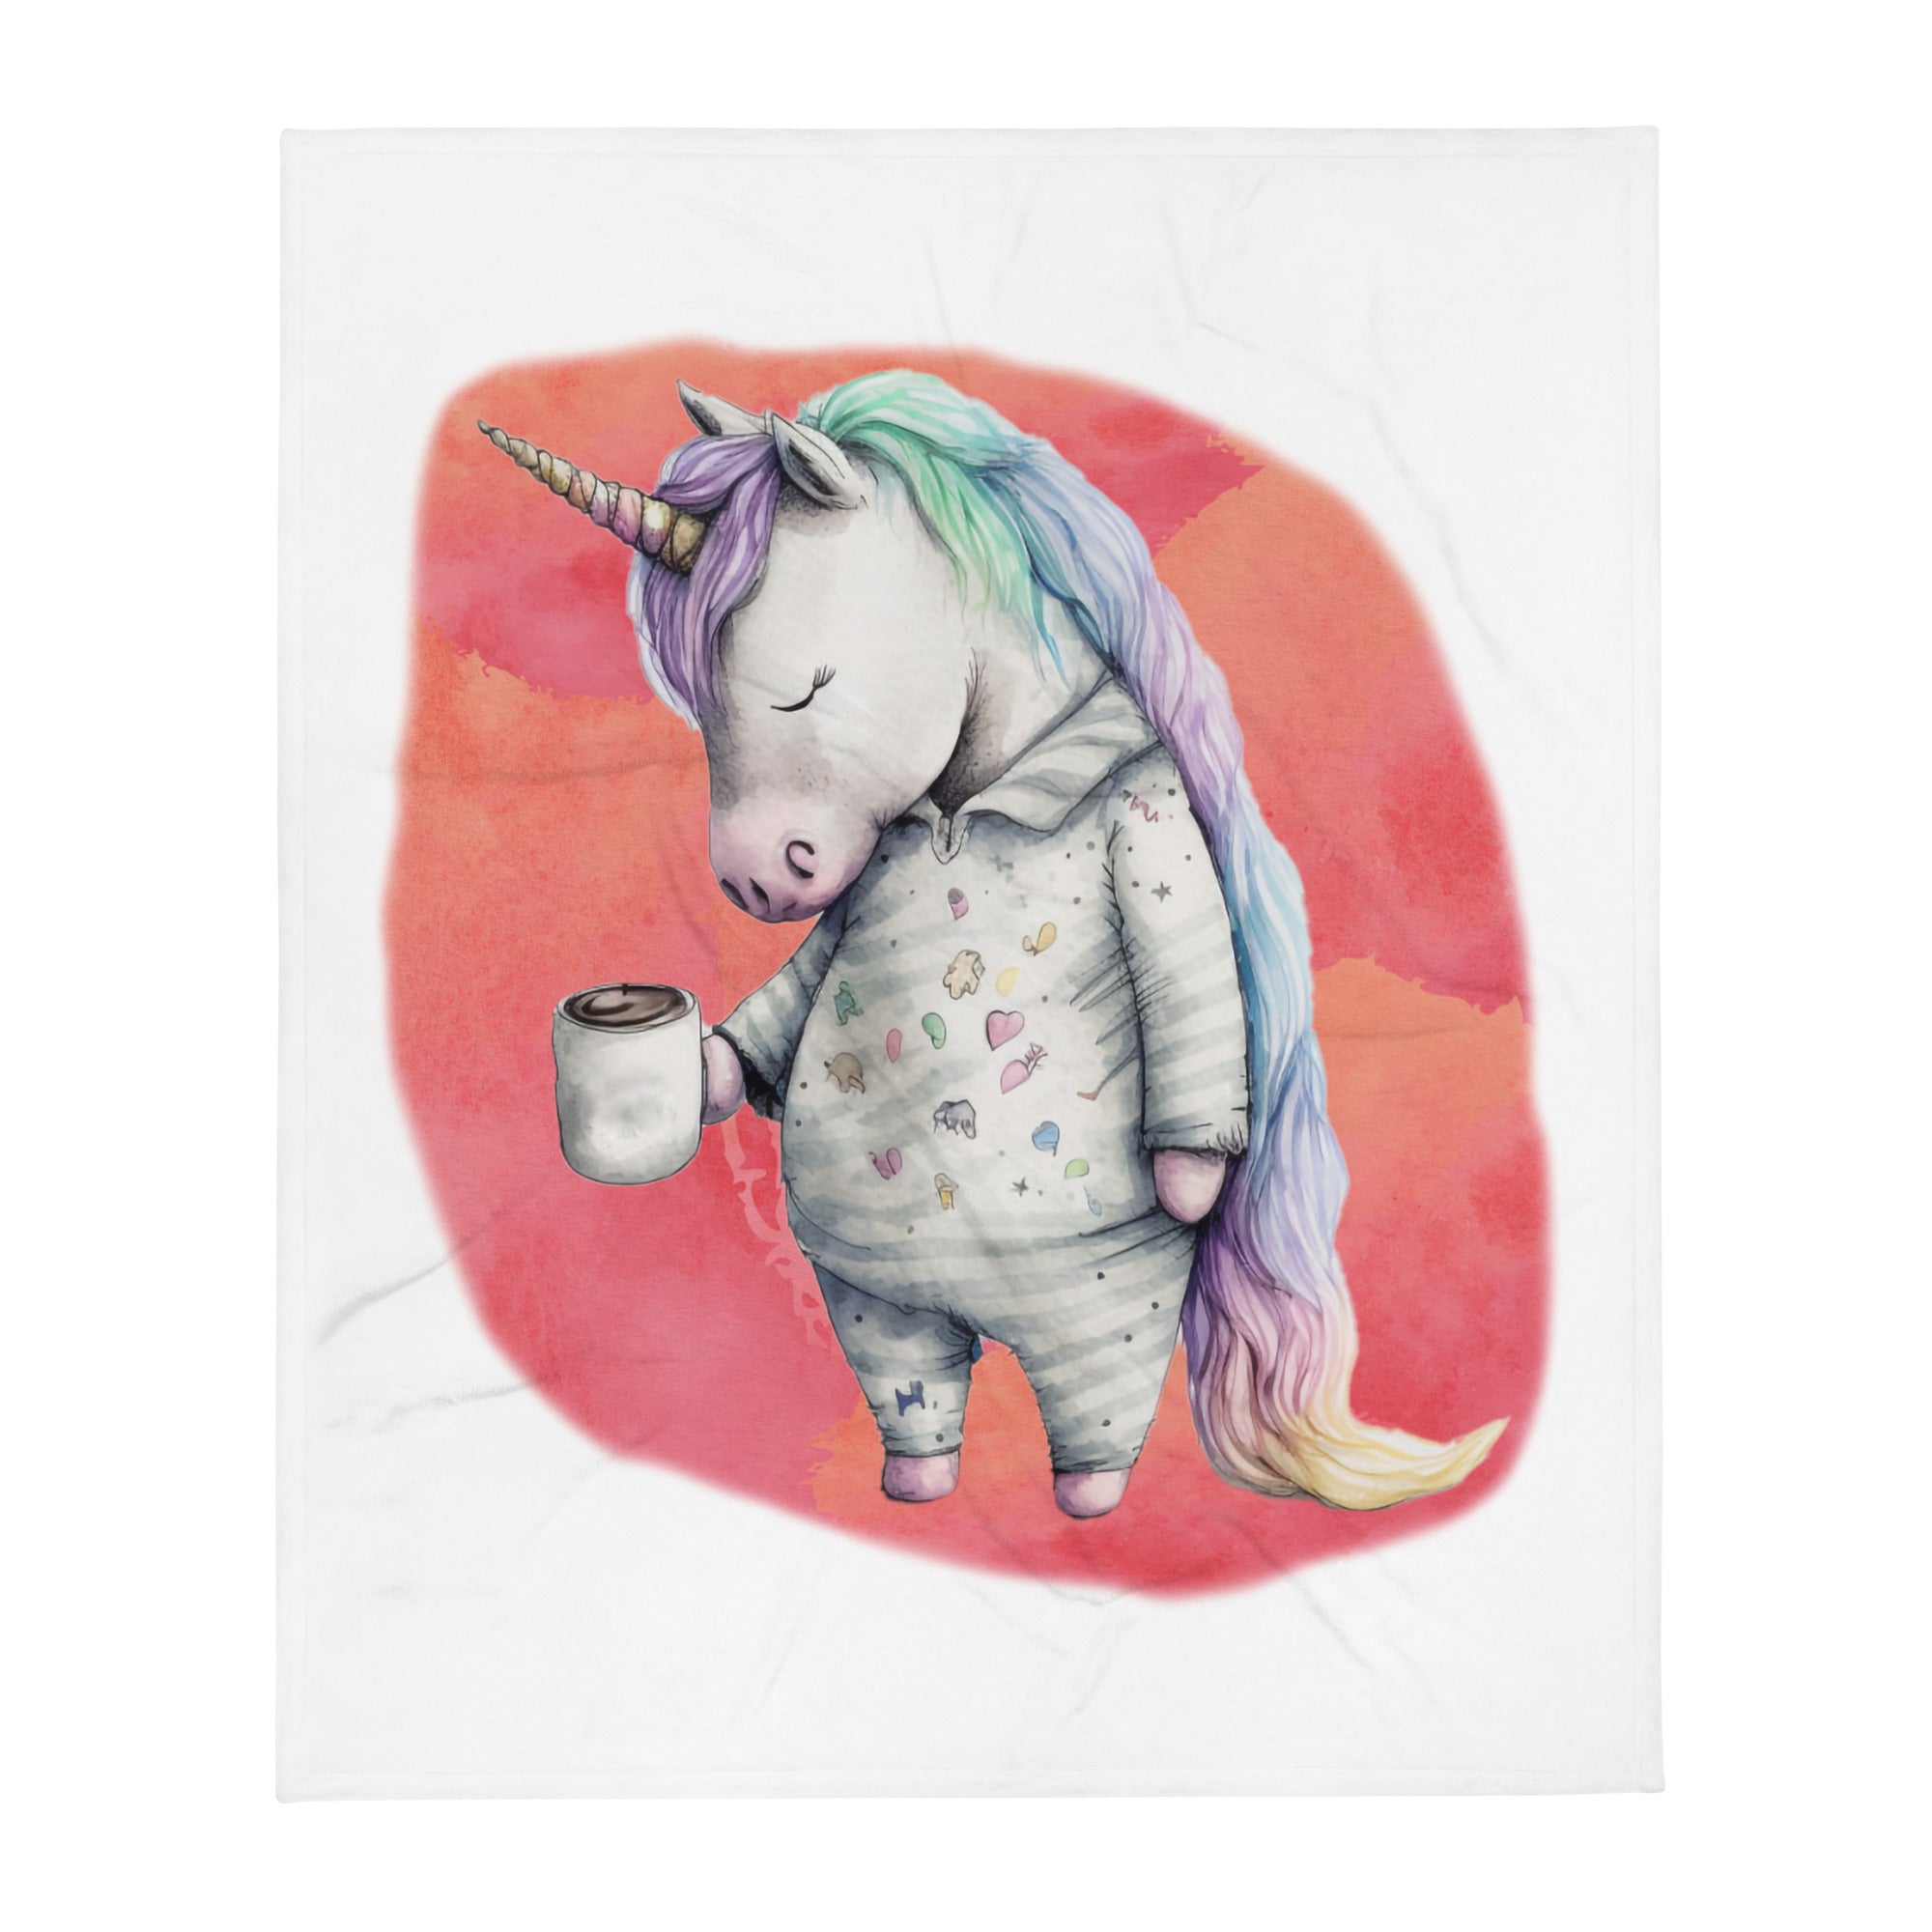 Sleepy Unicorn 100% Polyester Soft Silk Touch Fabric Throw Blanket - Cozy, Durable and Adorable